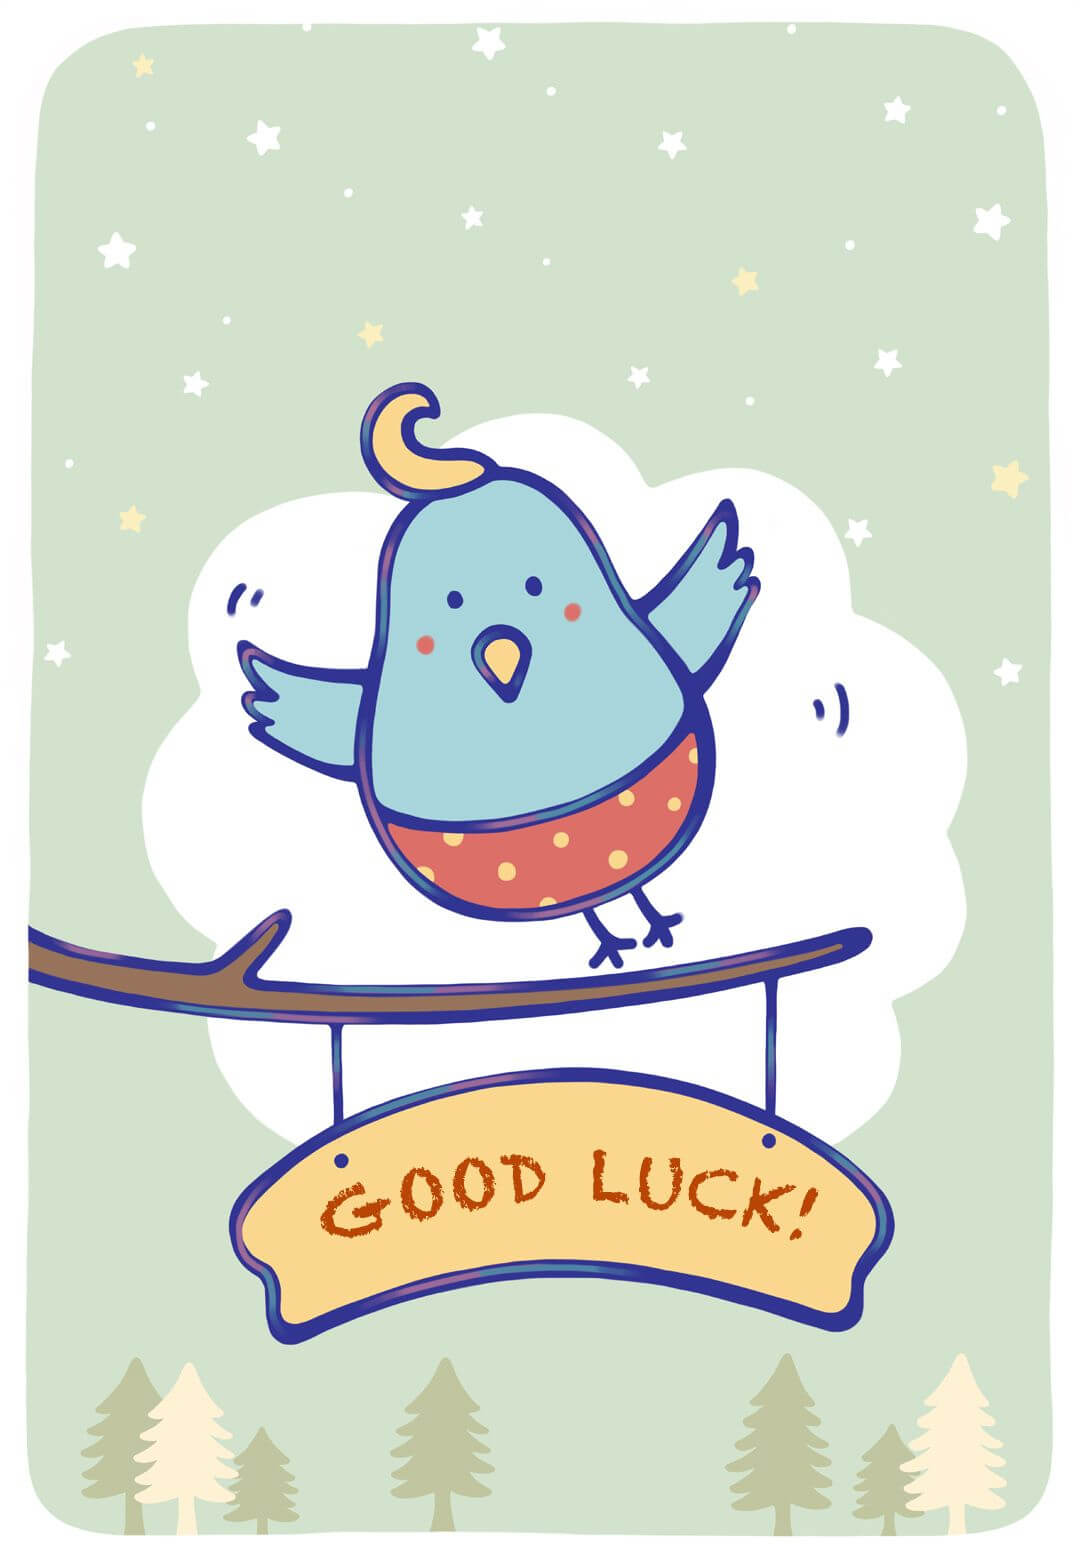 Free Printable Bluebird Of Happiness Greeting Card Inside Good Luck Card Template